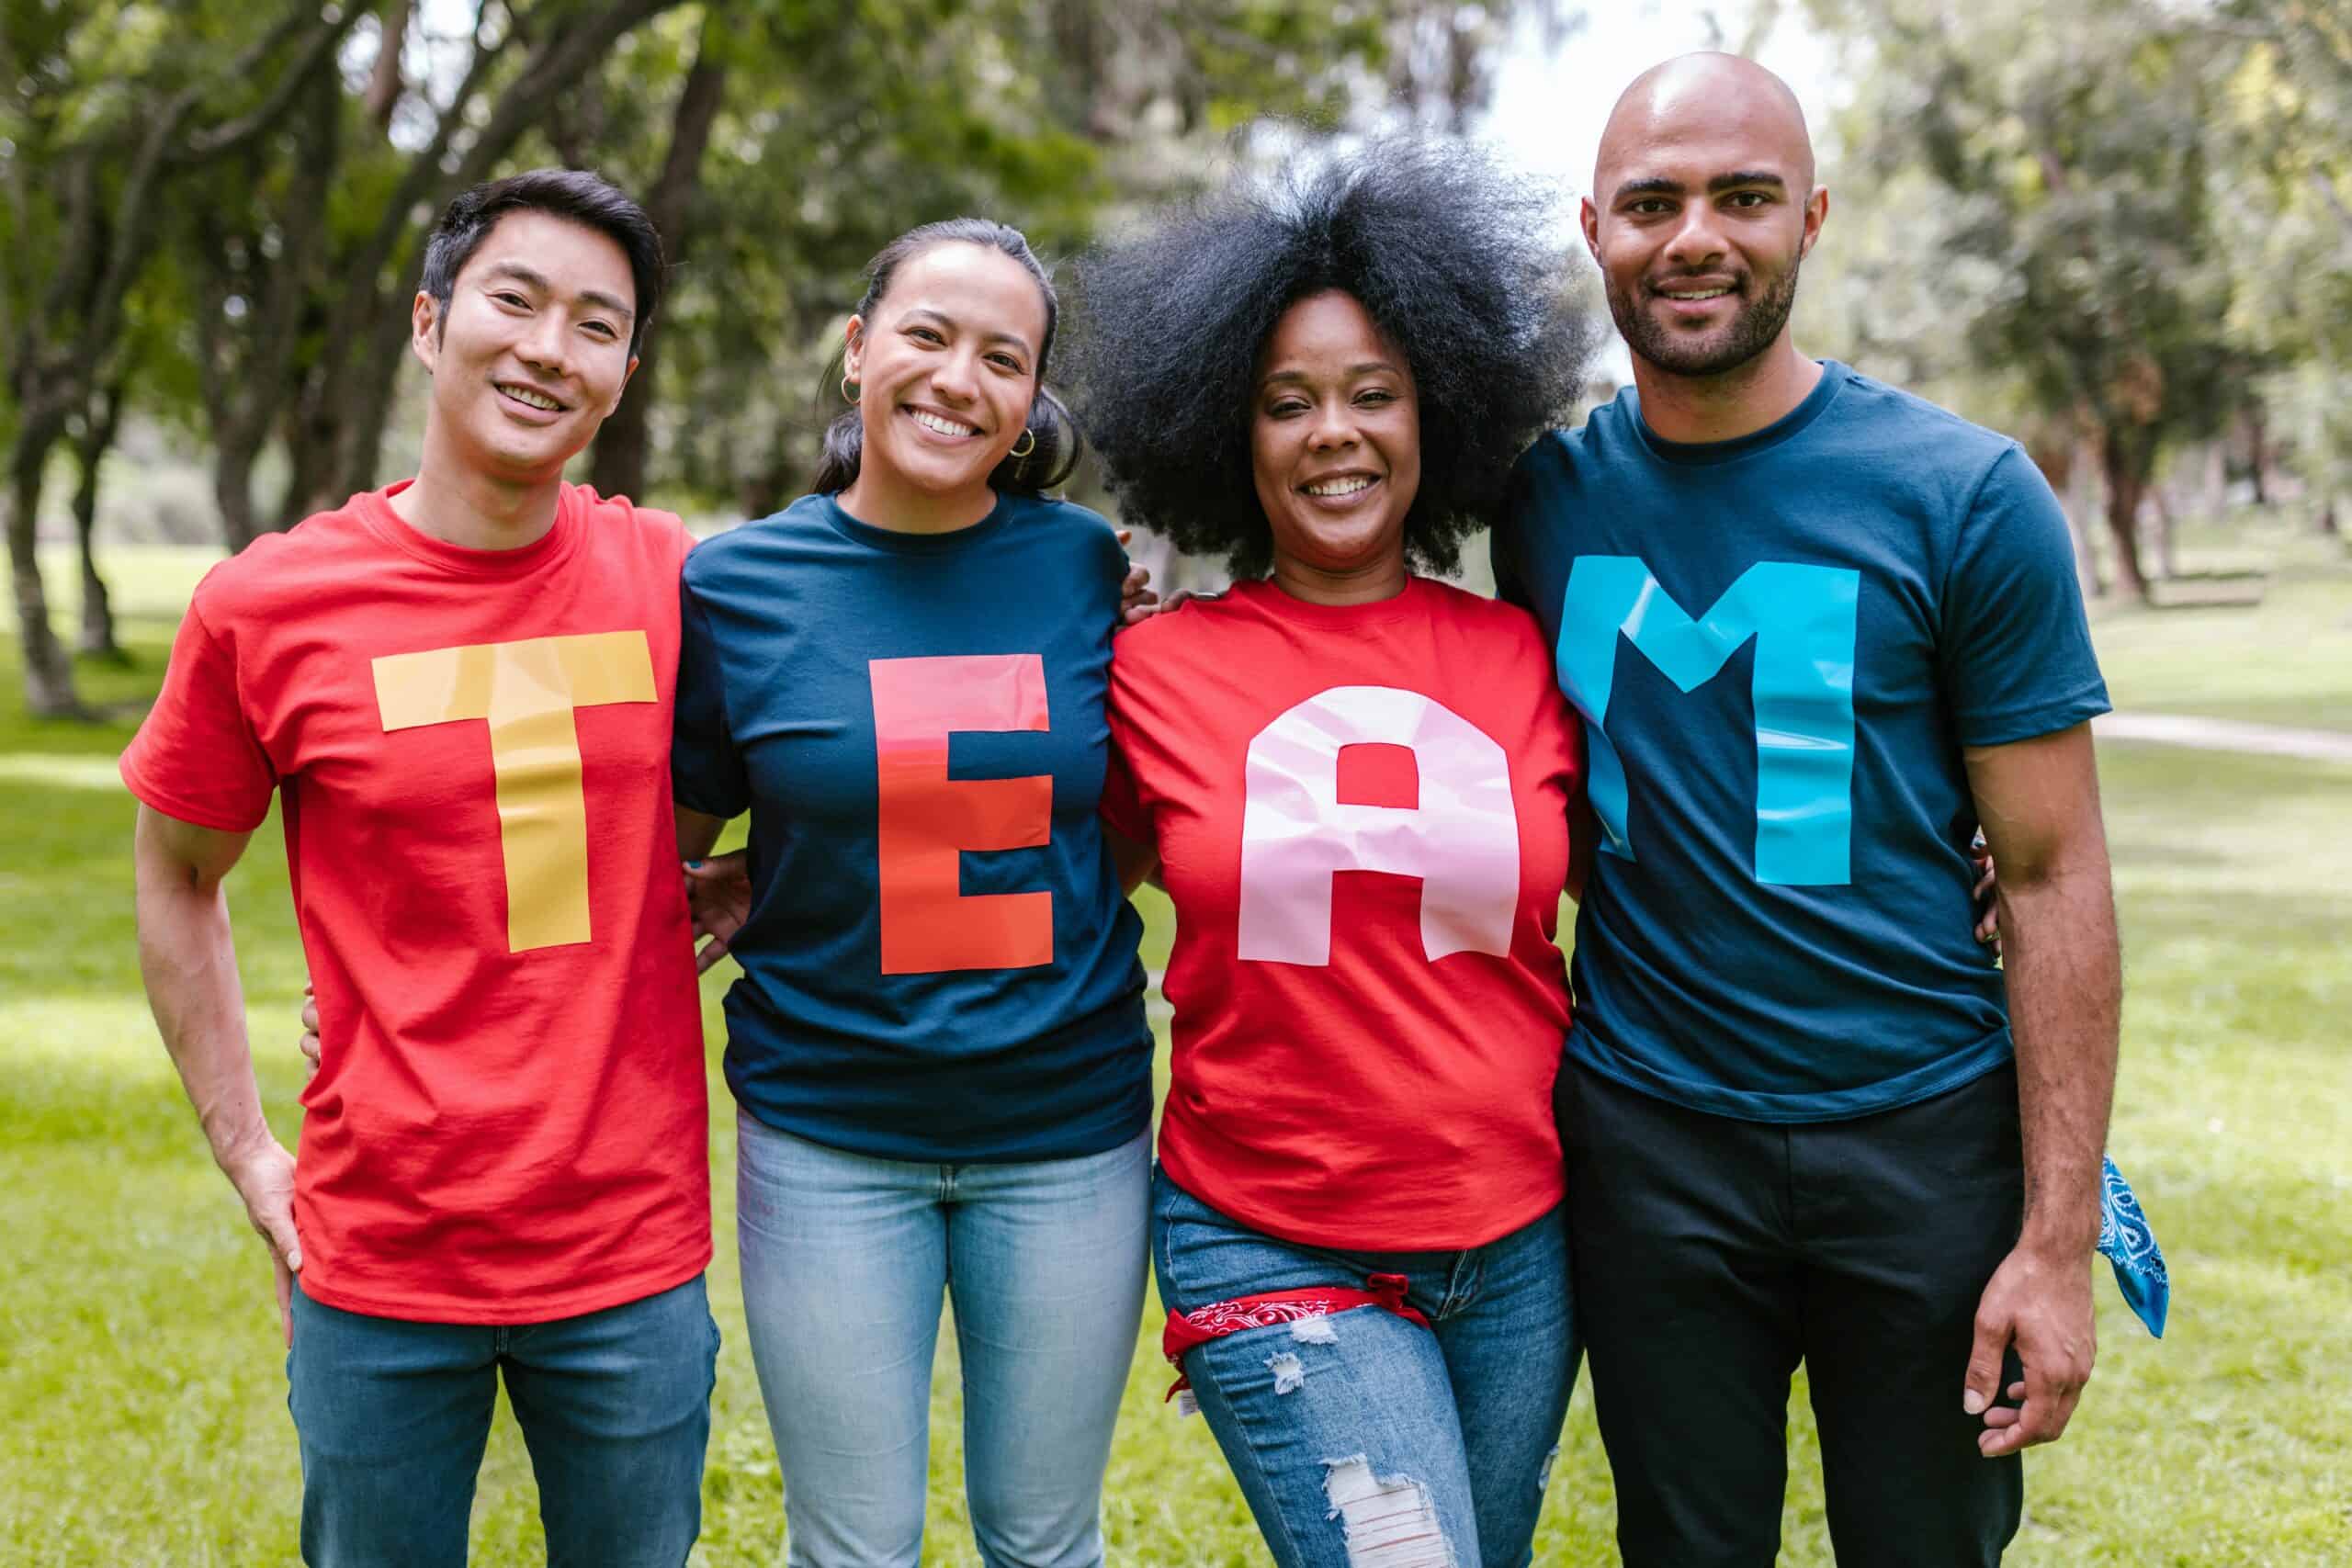 People wearing multiple colored shirts with letters. Together, it spells team.